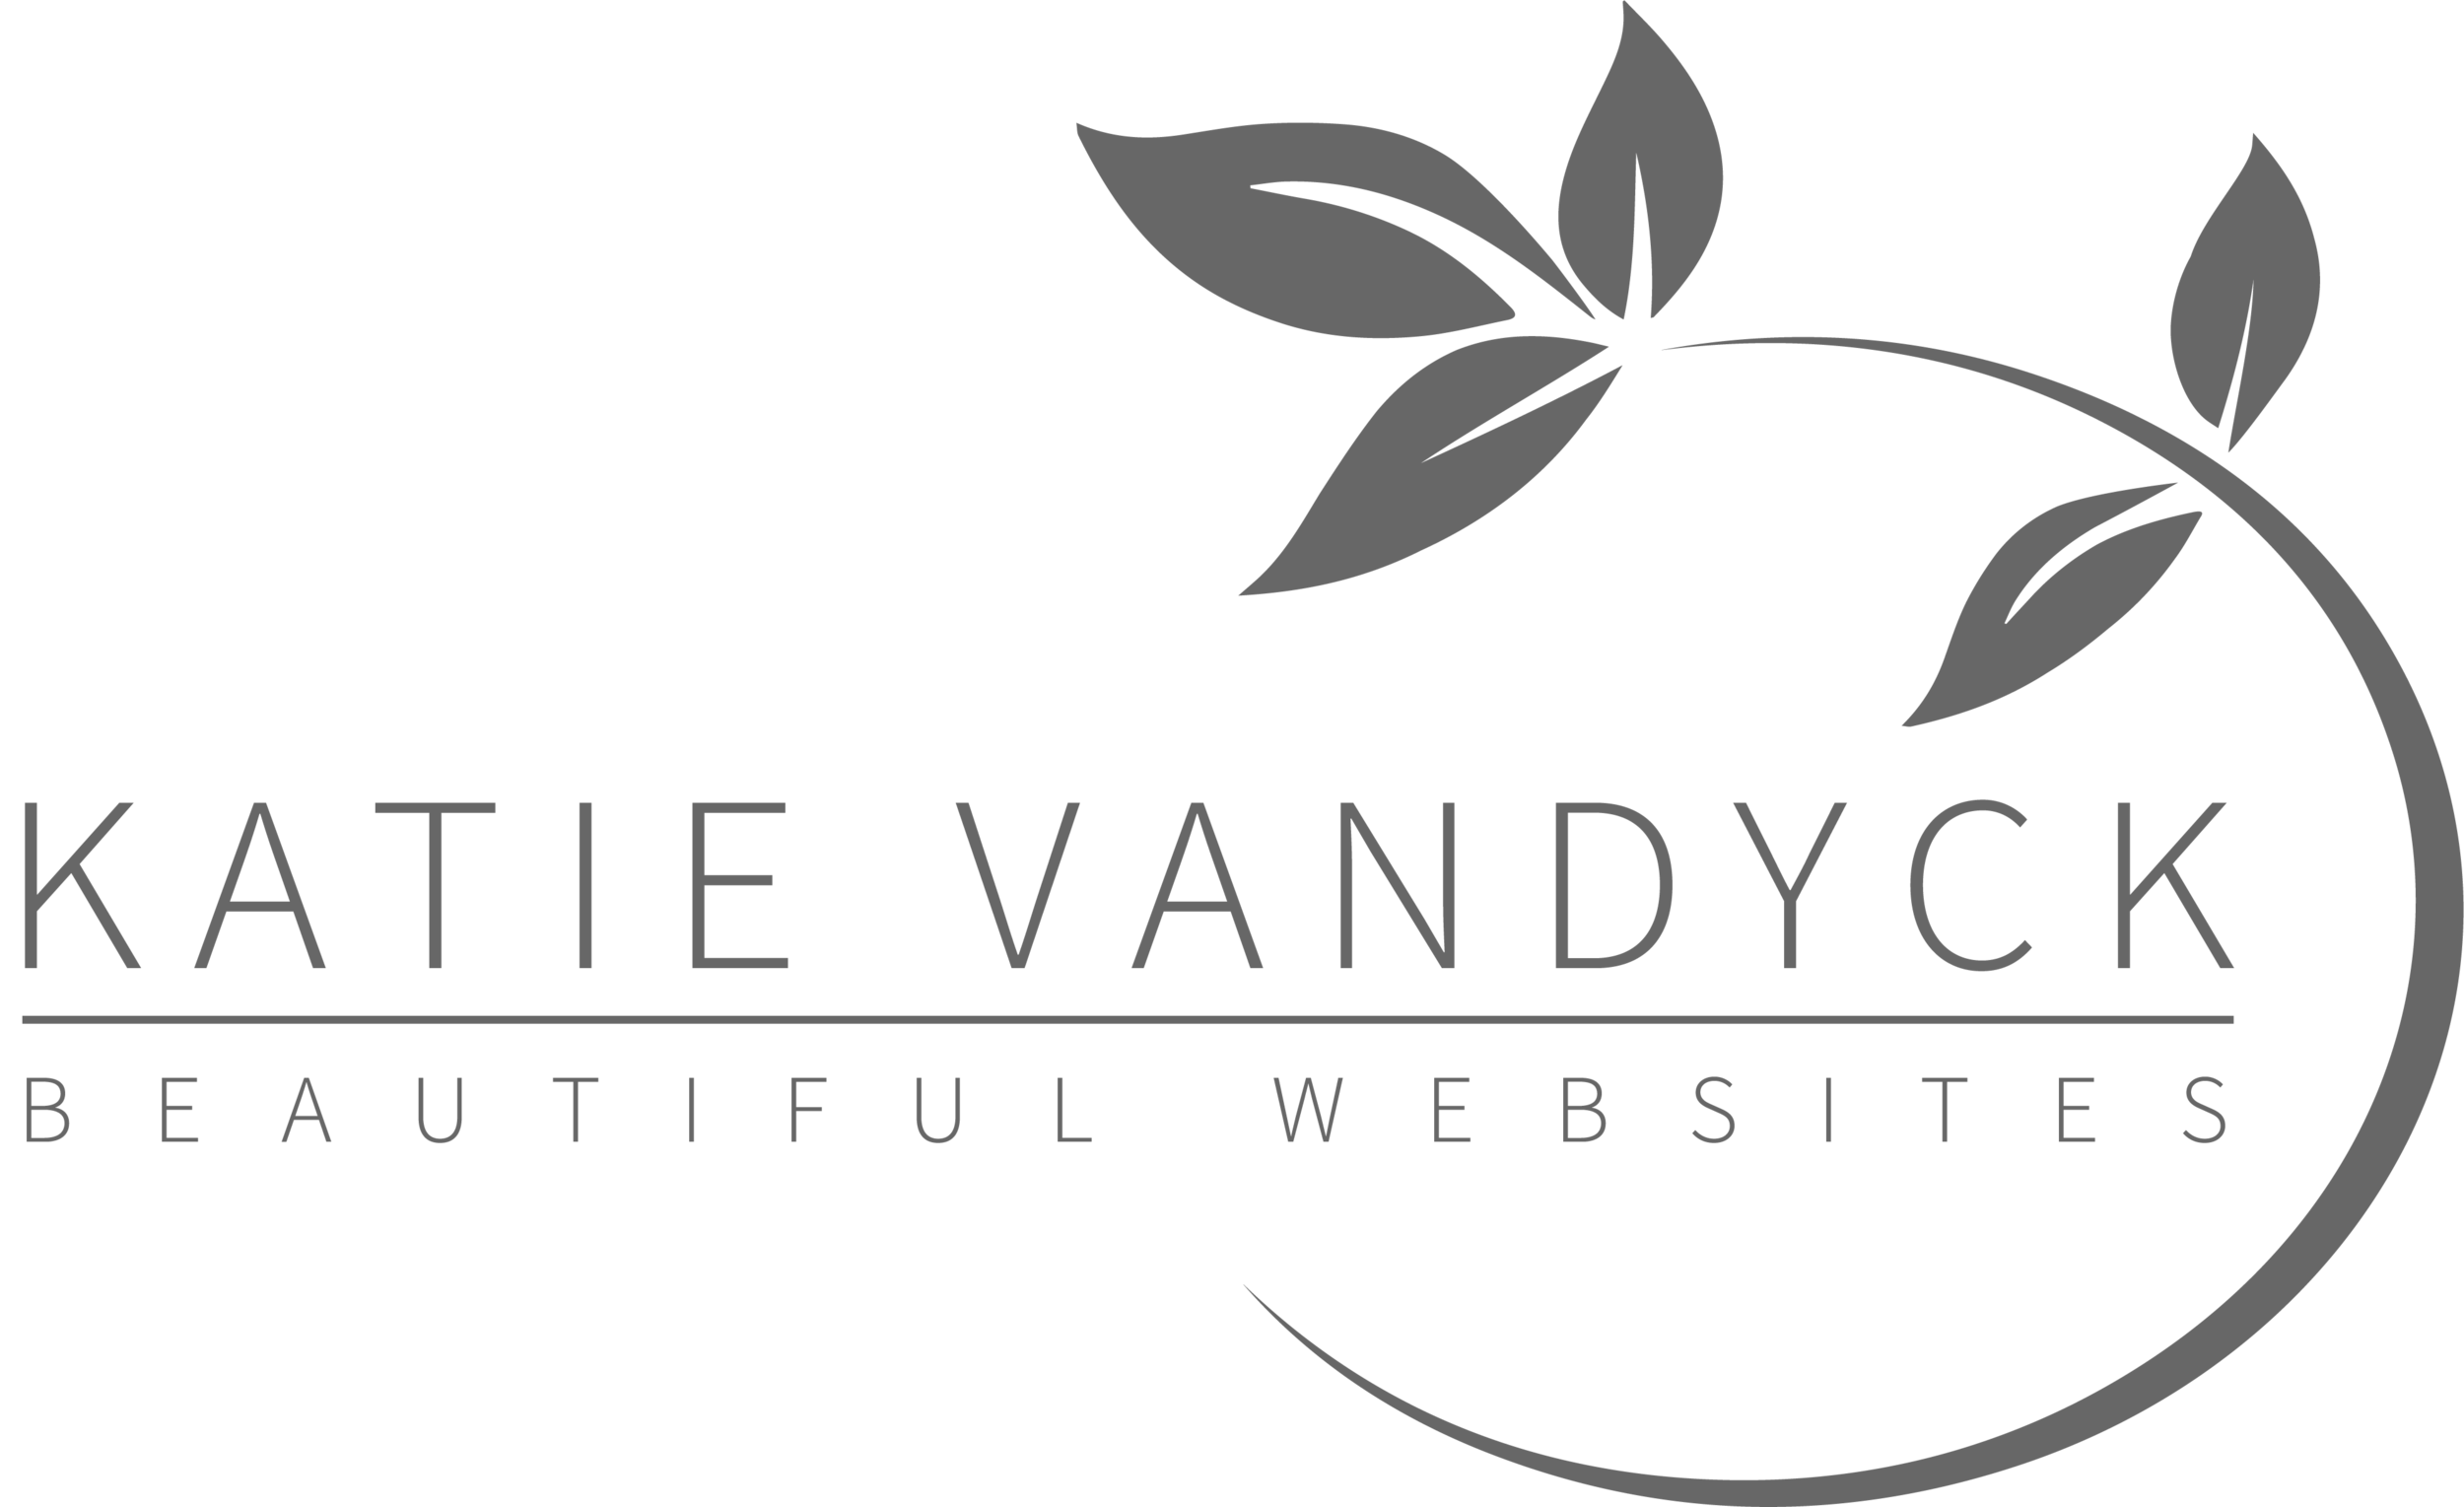 Katie Vandyck Websites for Start-Ups and Small Businesses